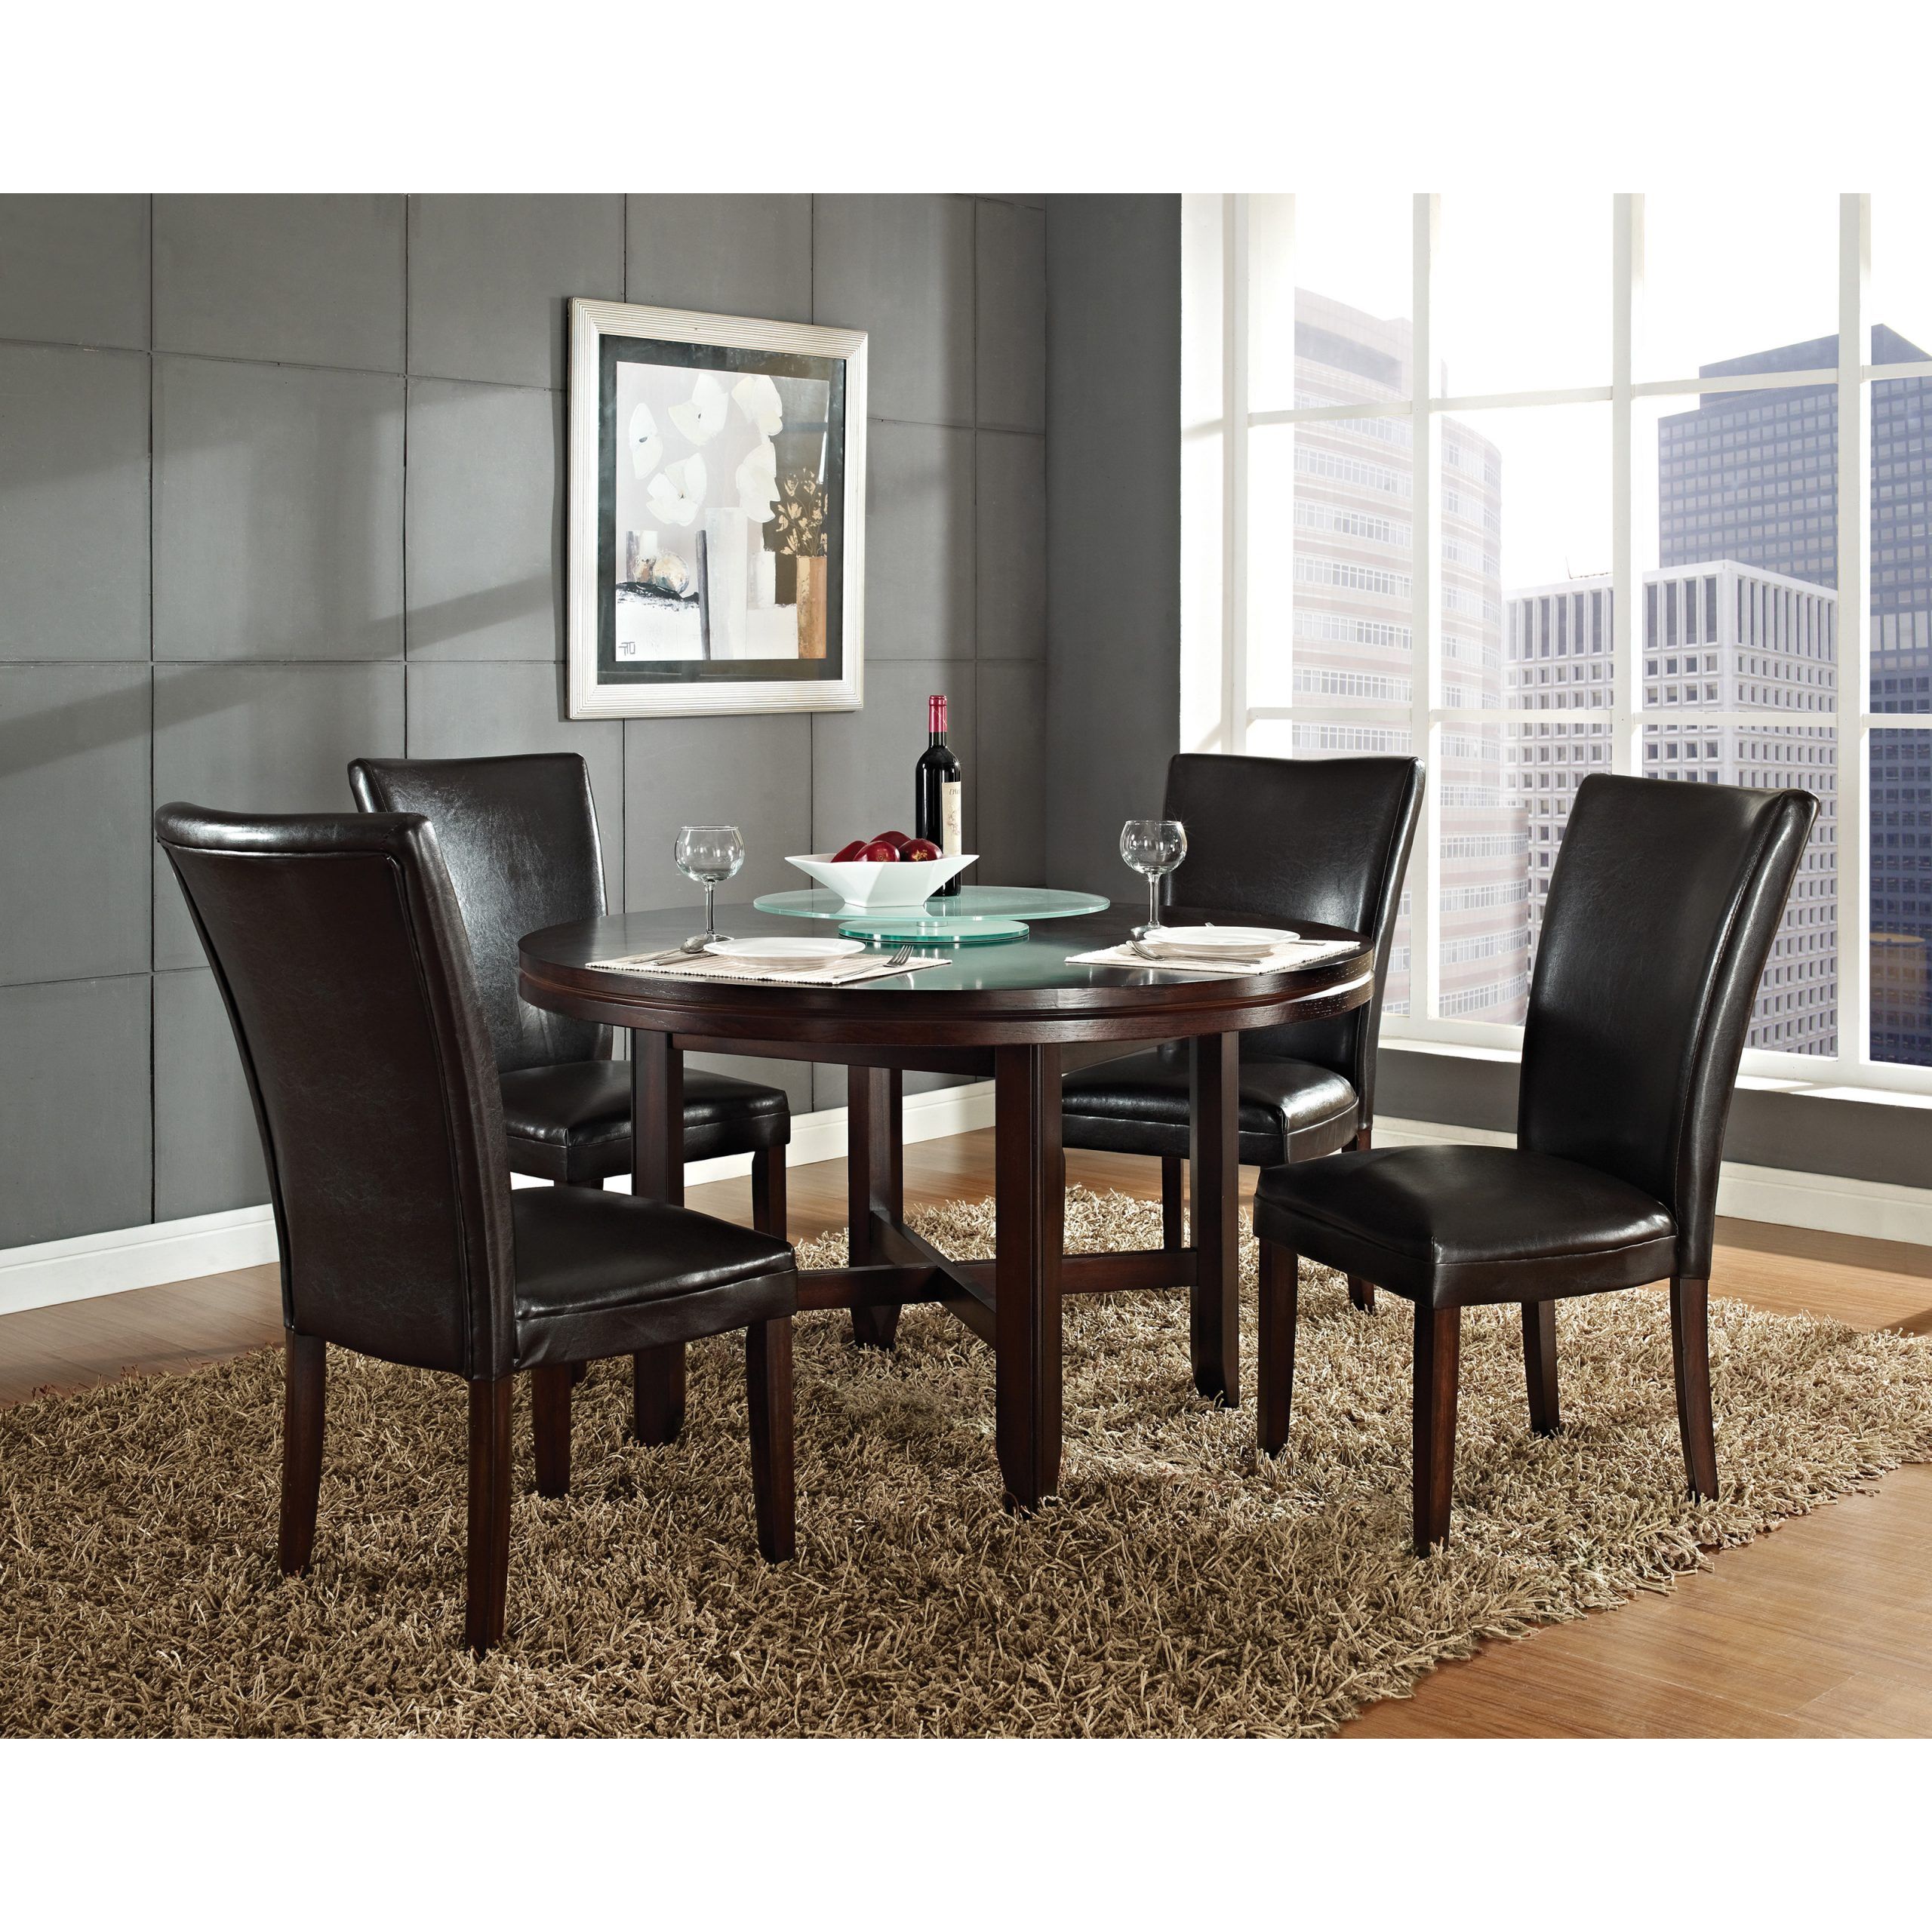 Silver Dining Tables With Regard To Best And Newest Steve Silver Hartford Small Round Dining Table – Dark (View 5 of 15)